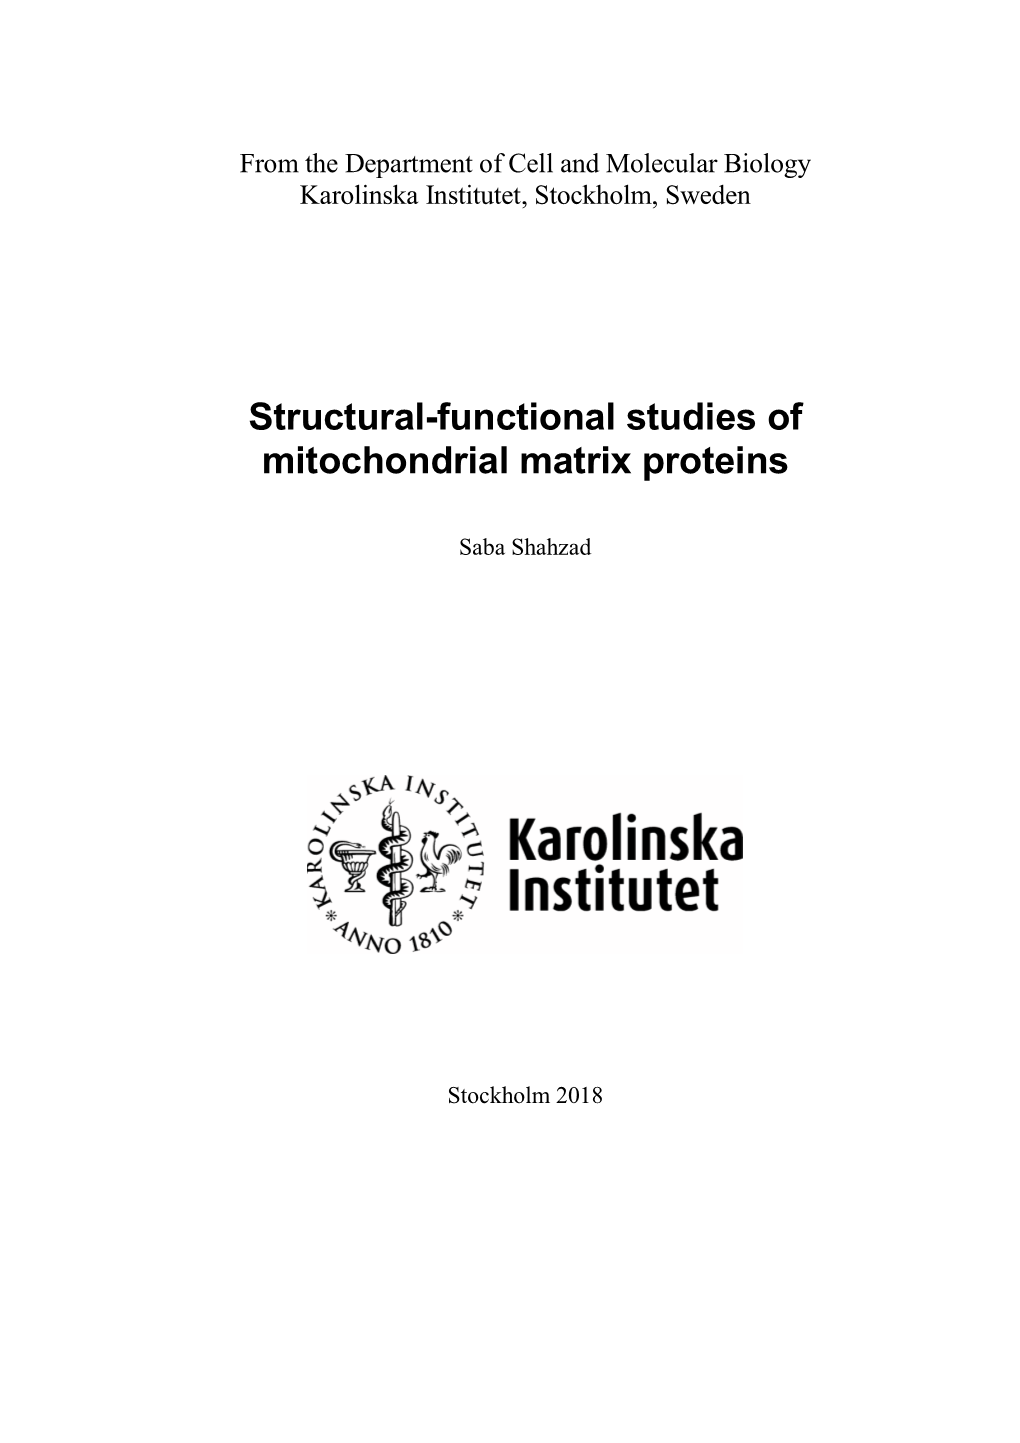 Structural-Functional Studies of Mitochondrial Matrix Proteins